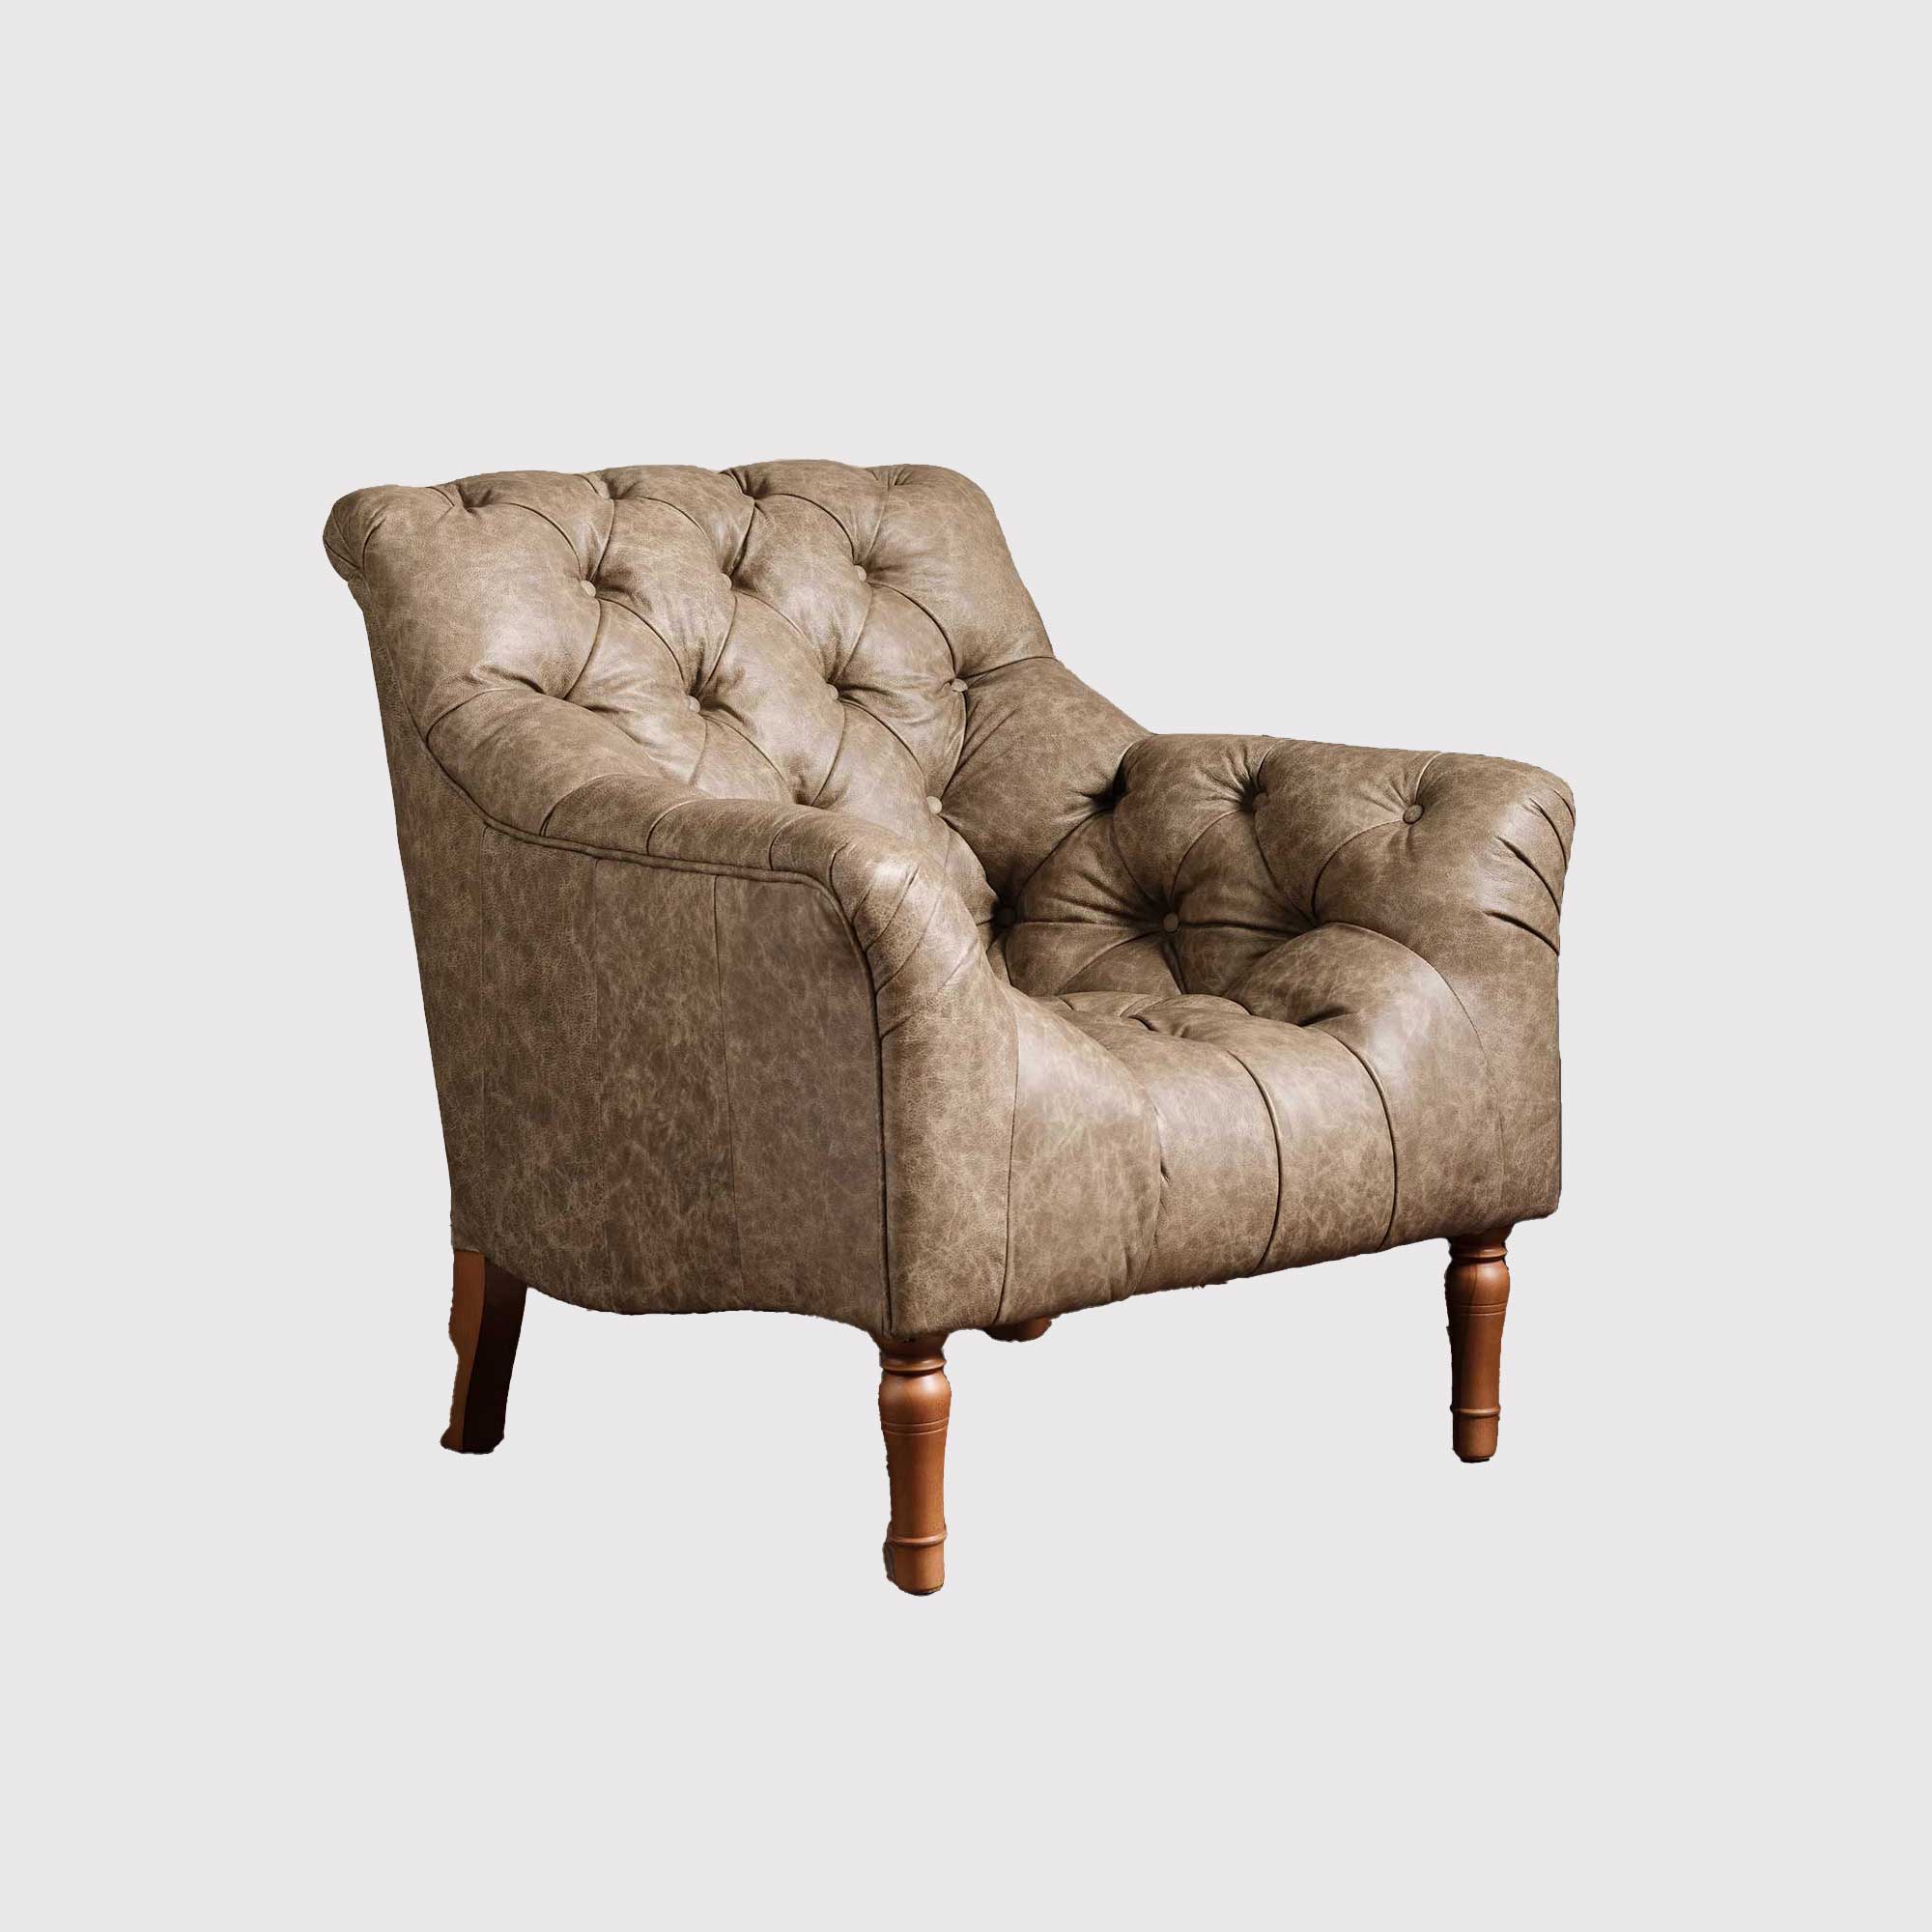 Forman Leather Armchair, Brown | Barker & Stonehouse